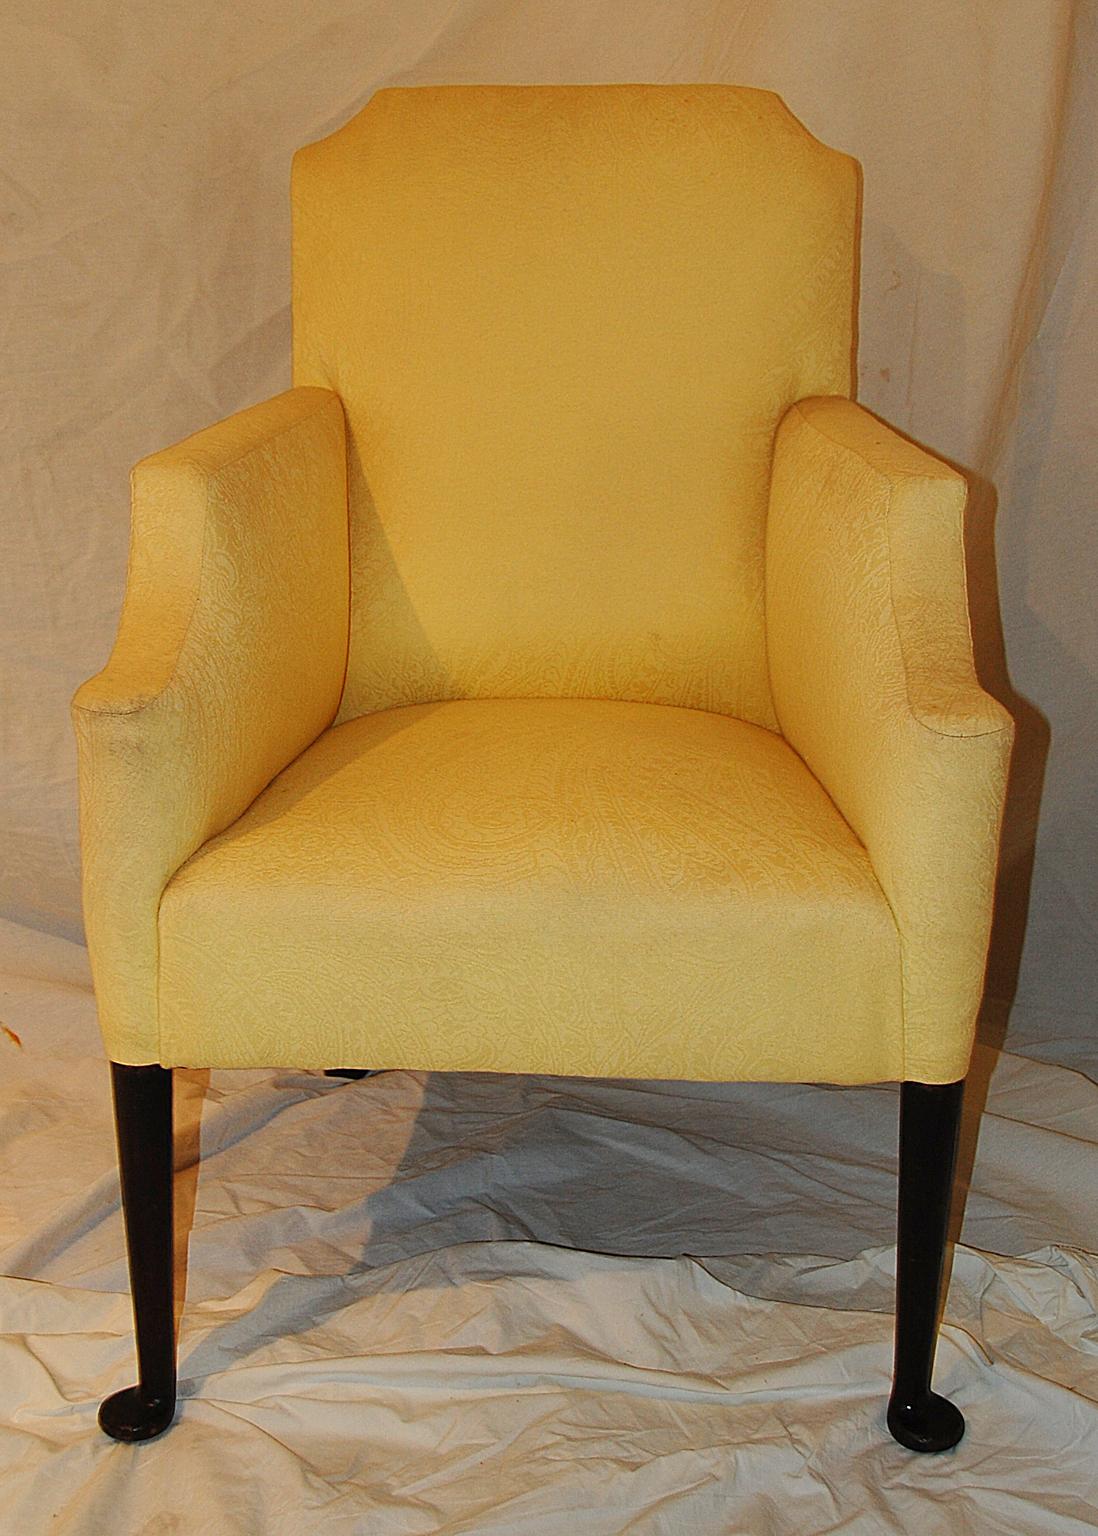 English Georgian mahogany period upholstered lounging chair, with carved pad feet, shaped back and yellow woven upholstery. The upholstery is probably about 5 years old. This small scale lounging chair is easily placed in a bedroom, living room or